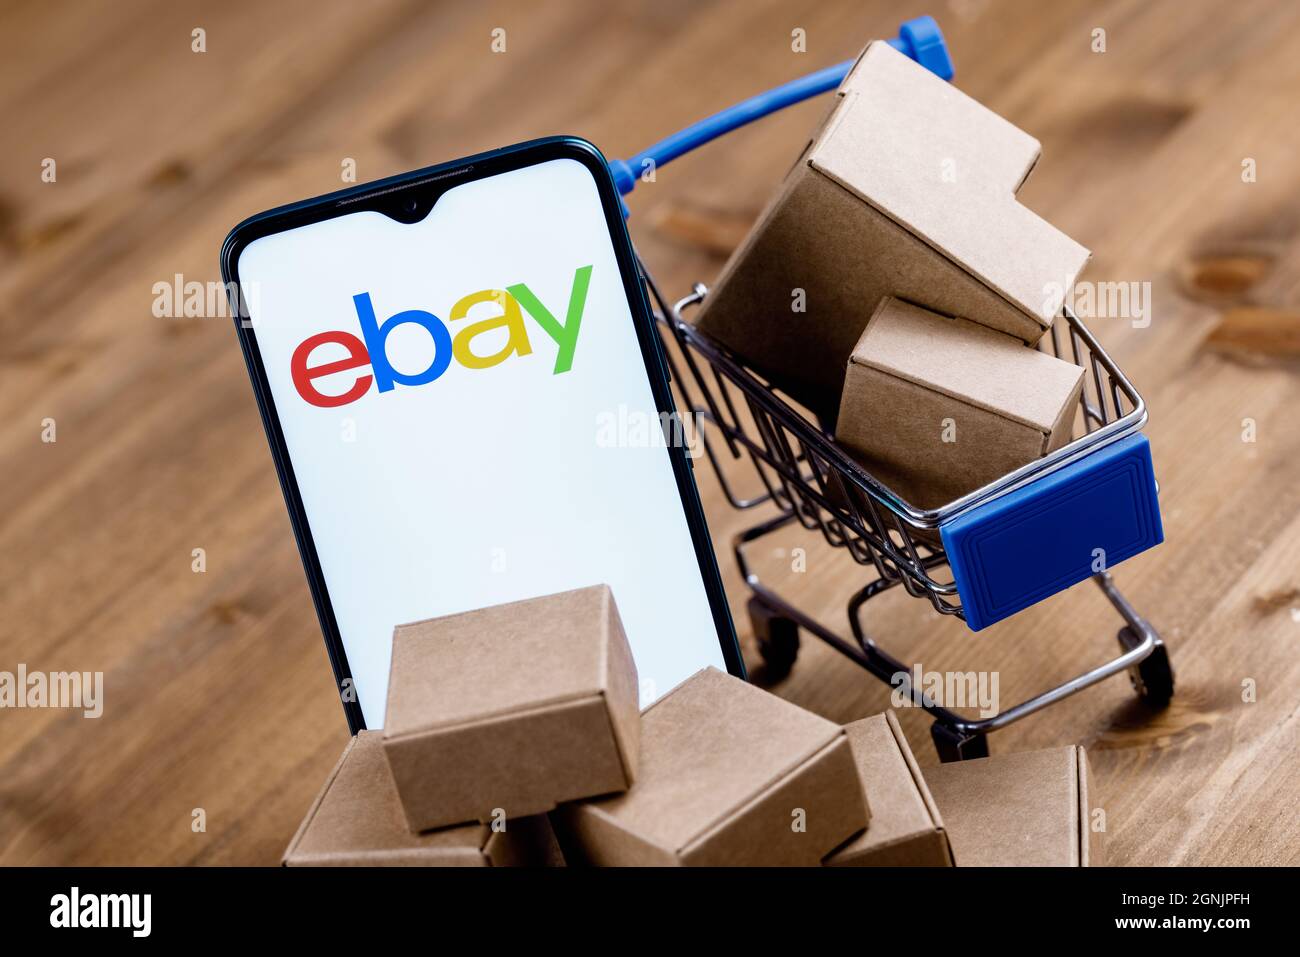 Smartphone with  logo on the screen, shopping cart and parcels